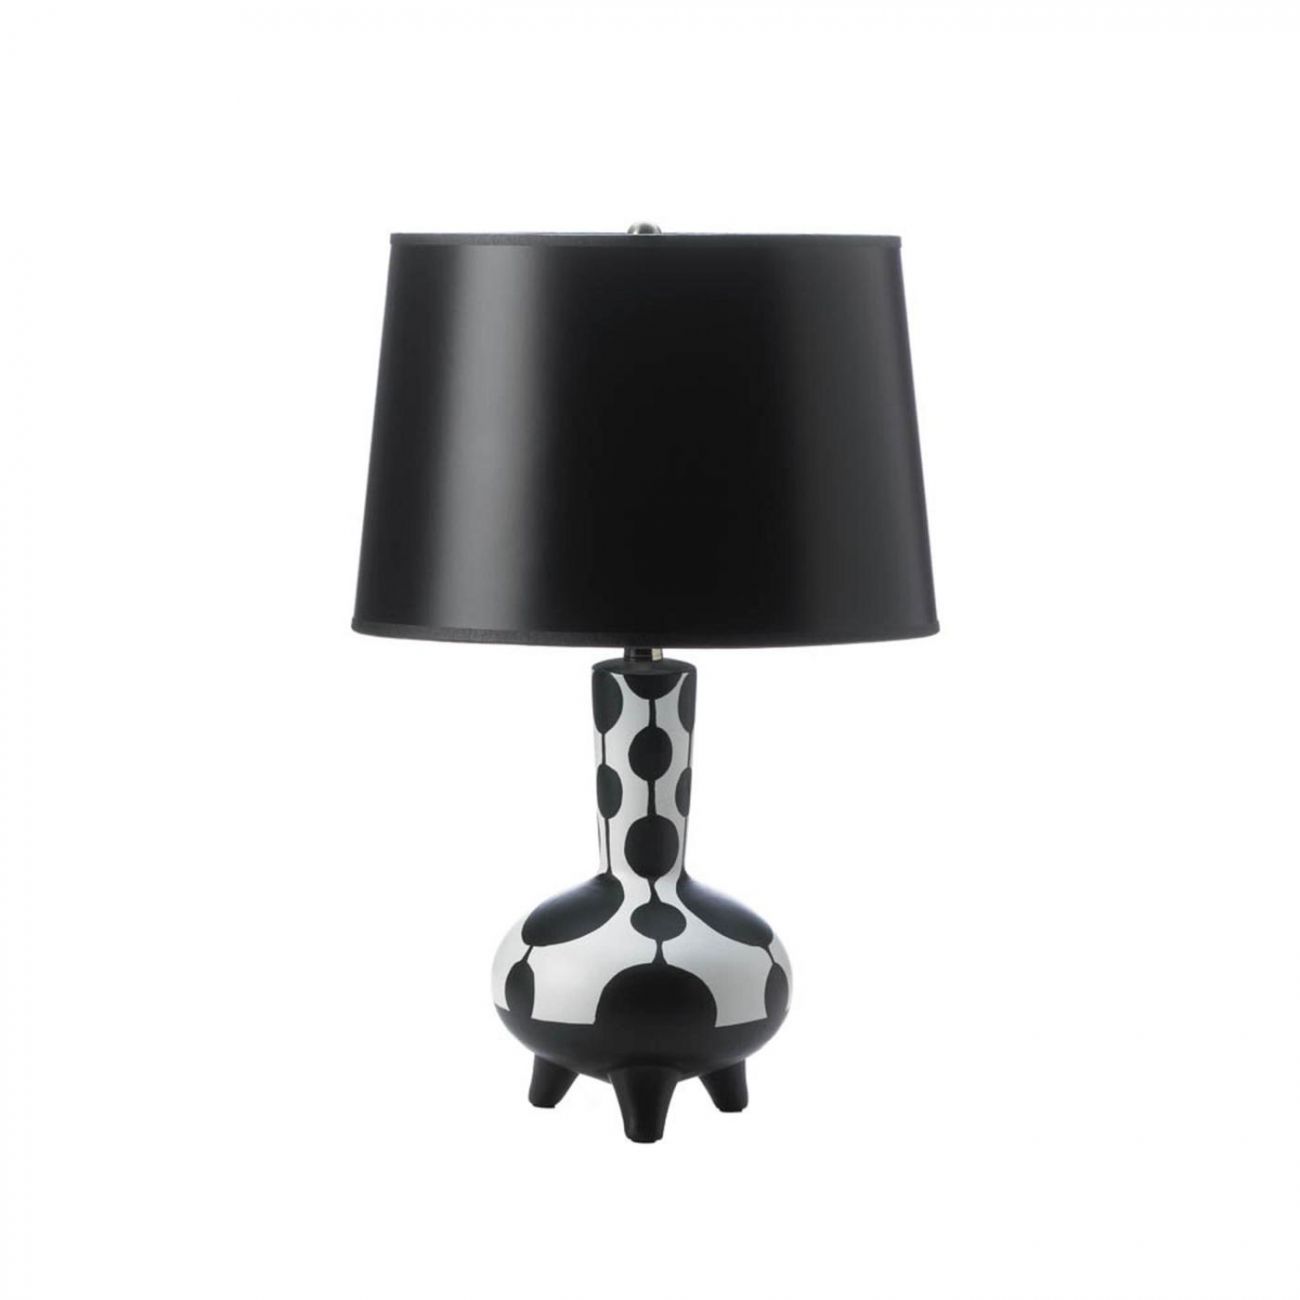 Dollop Black And White Table Lamp